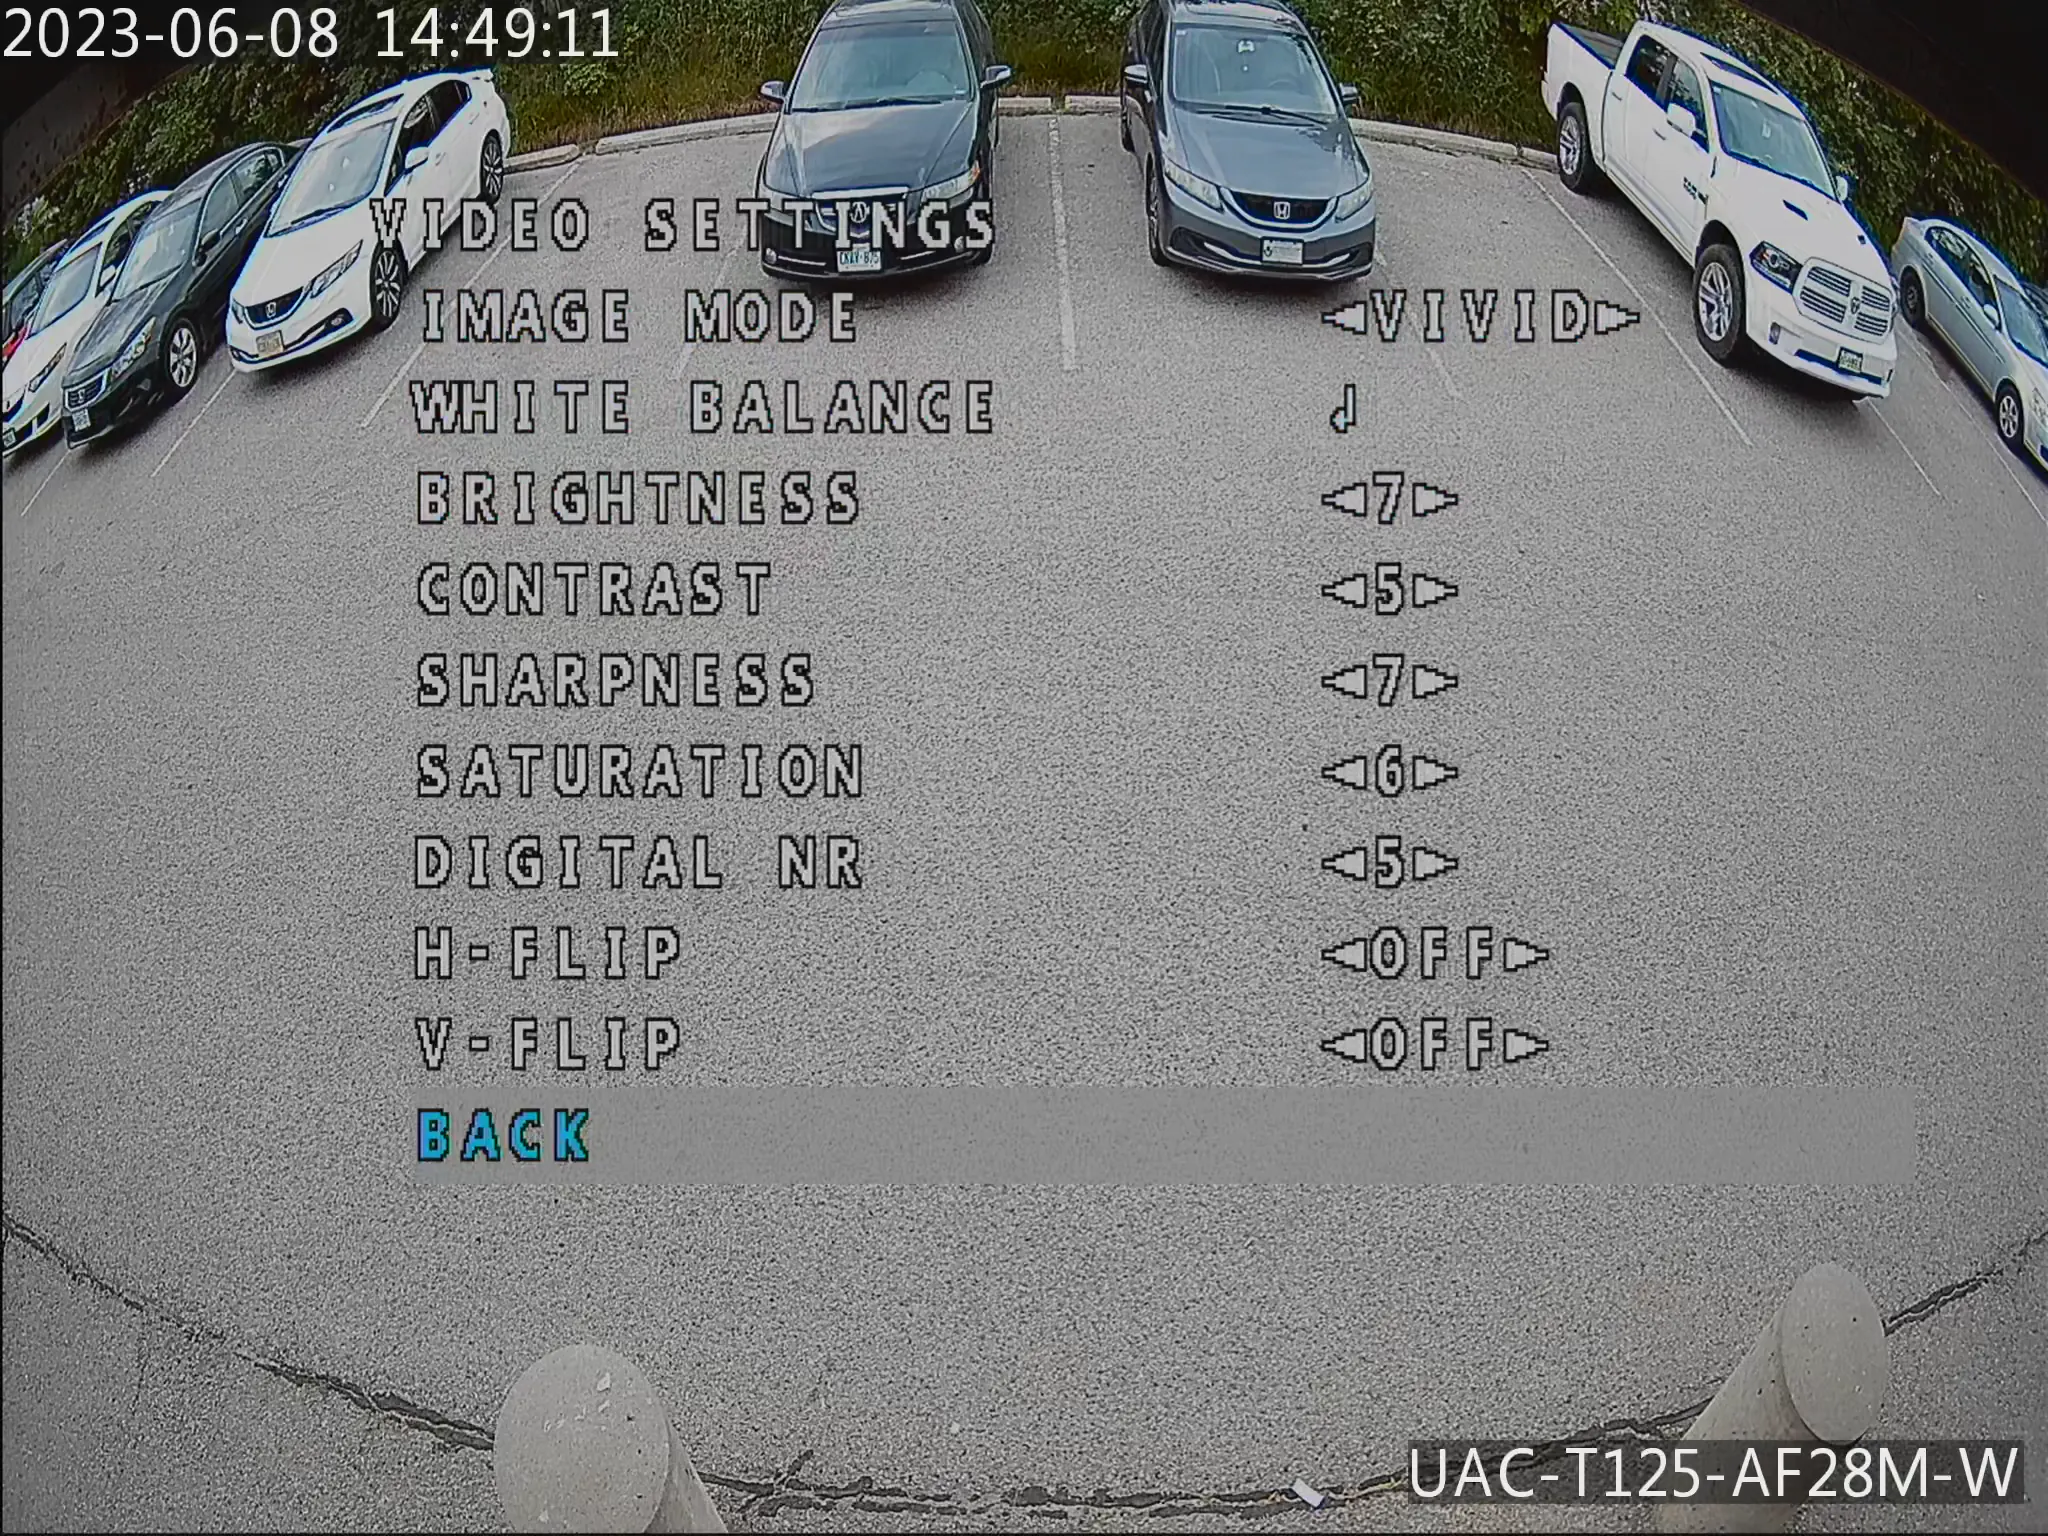 Security camera footage of a parking lot with a balanced exposure